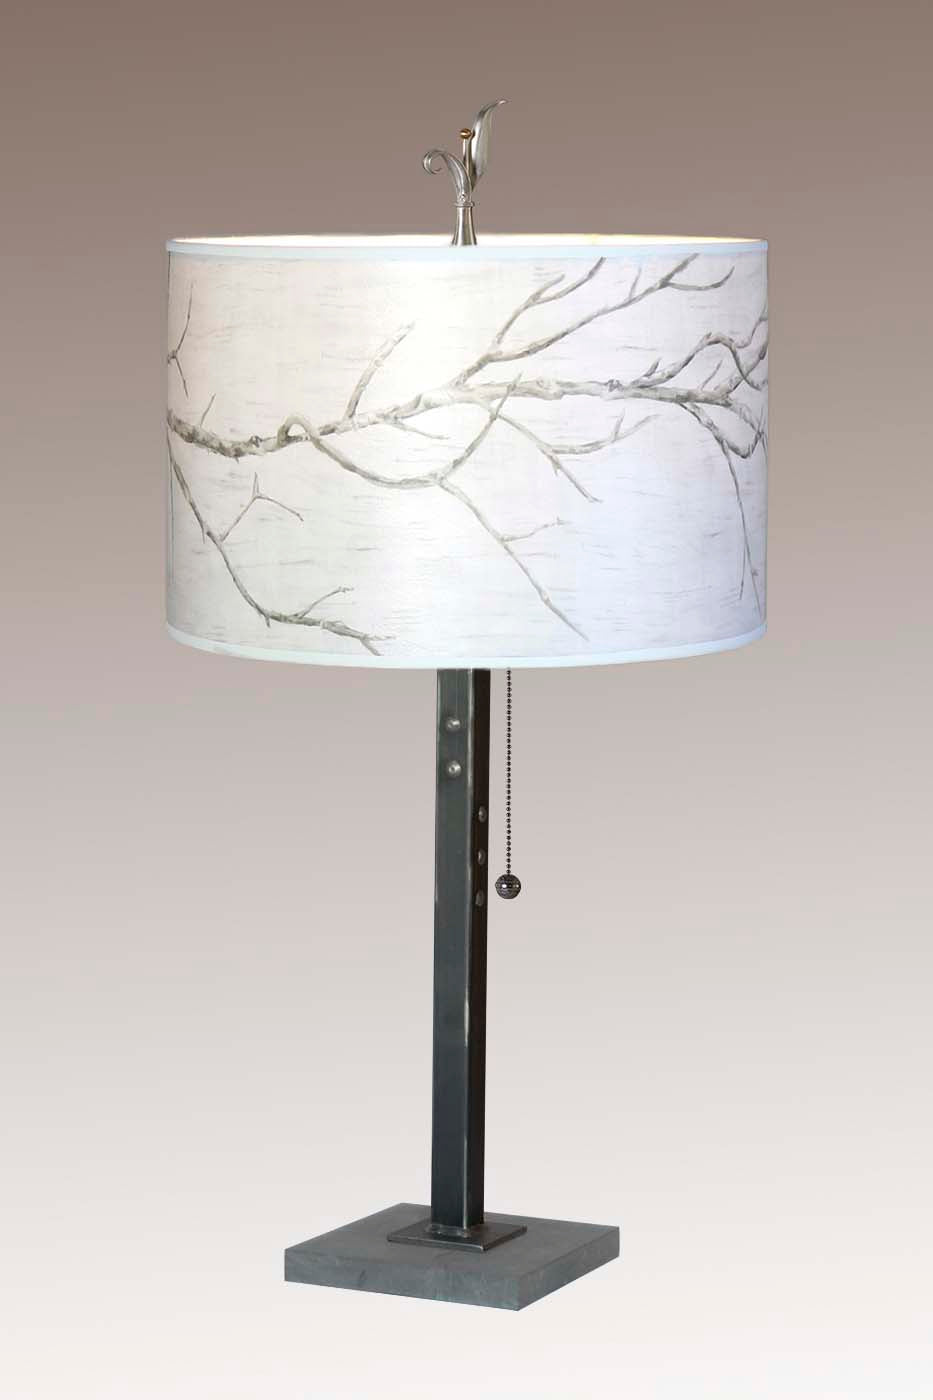 Janna Ugone &amp; Co Table Lamp Steel Table Lamp with Large Drum Shade in Sweeping Branch